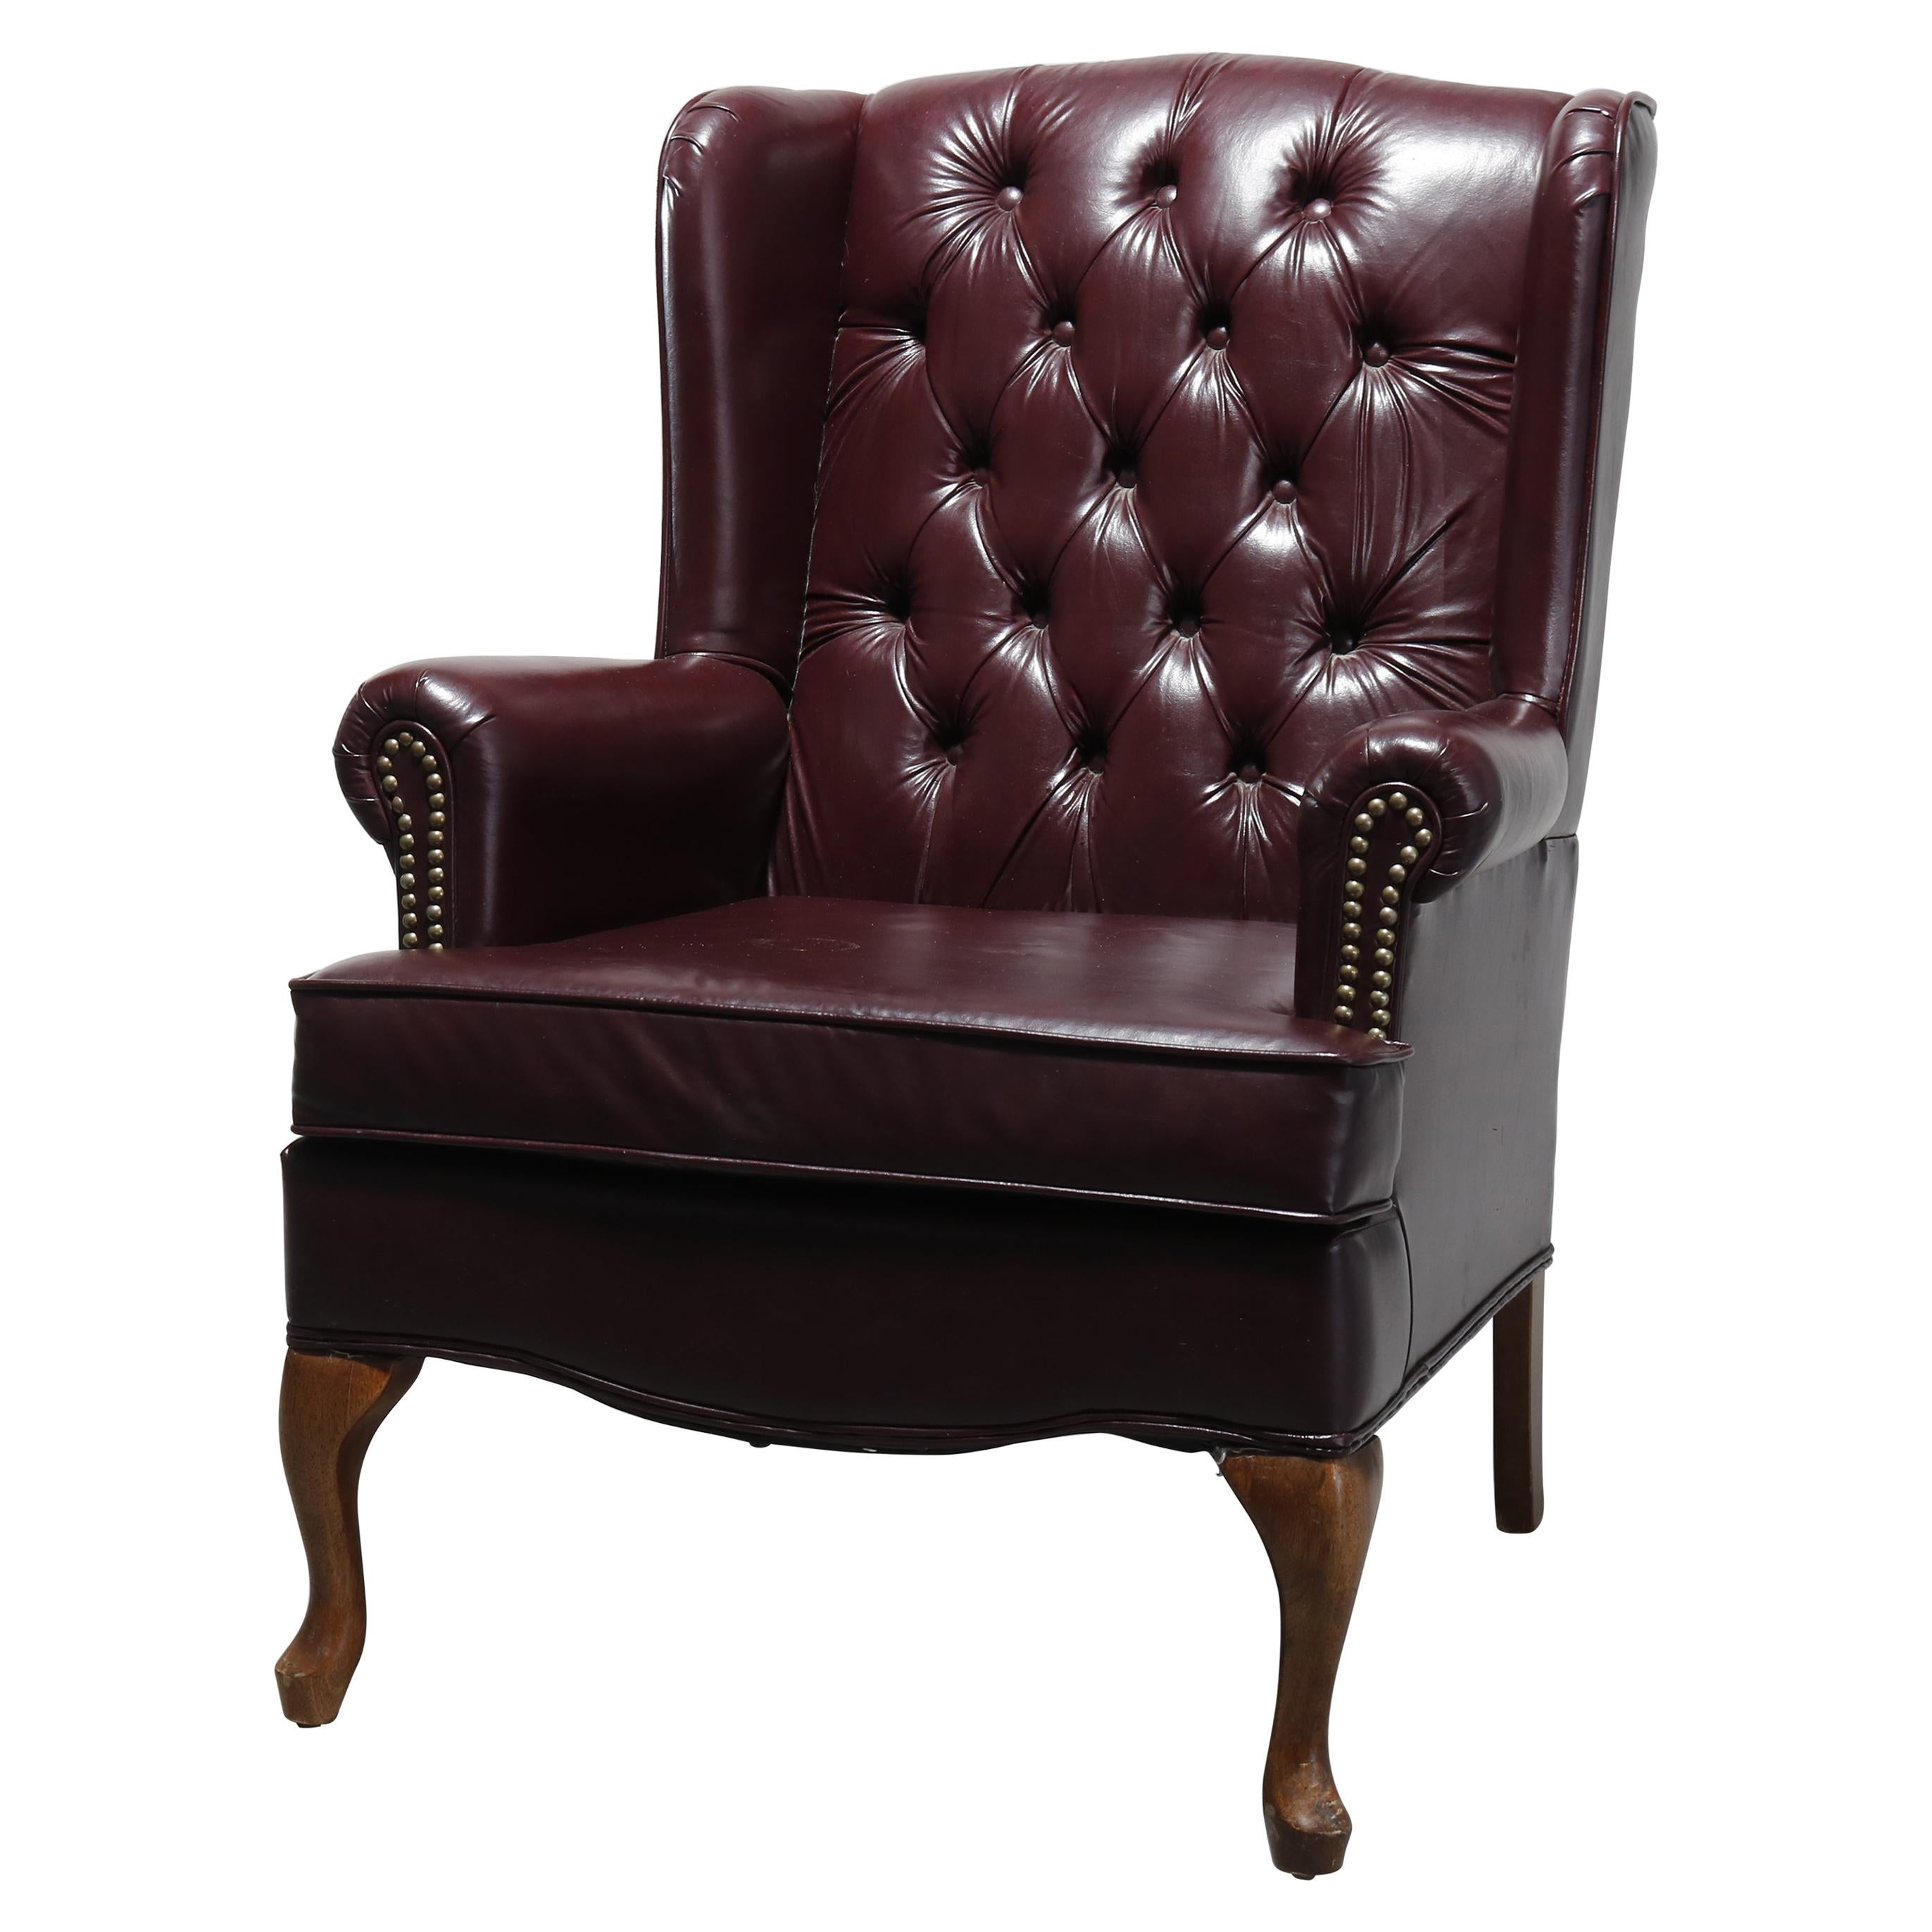 Antique Chesterfield Tufted Leather Wing Back Chair, 20th C